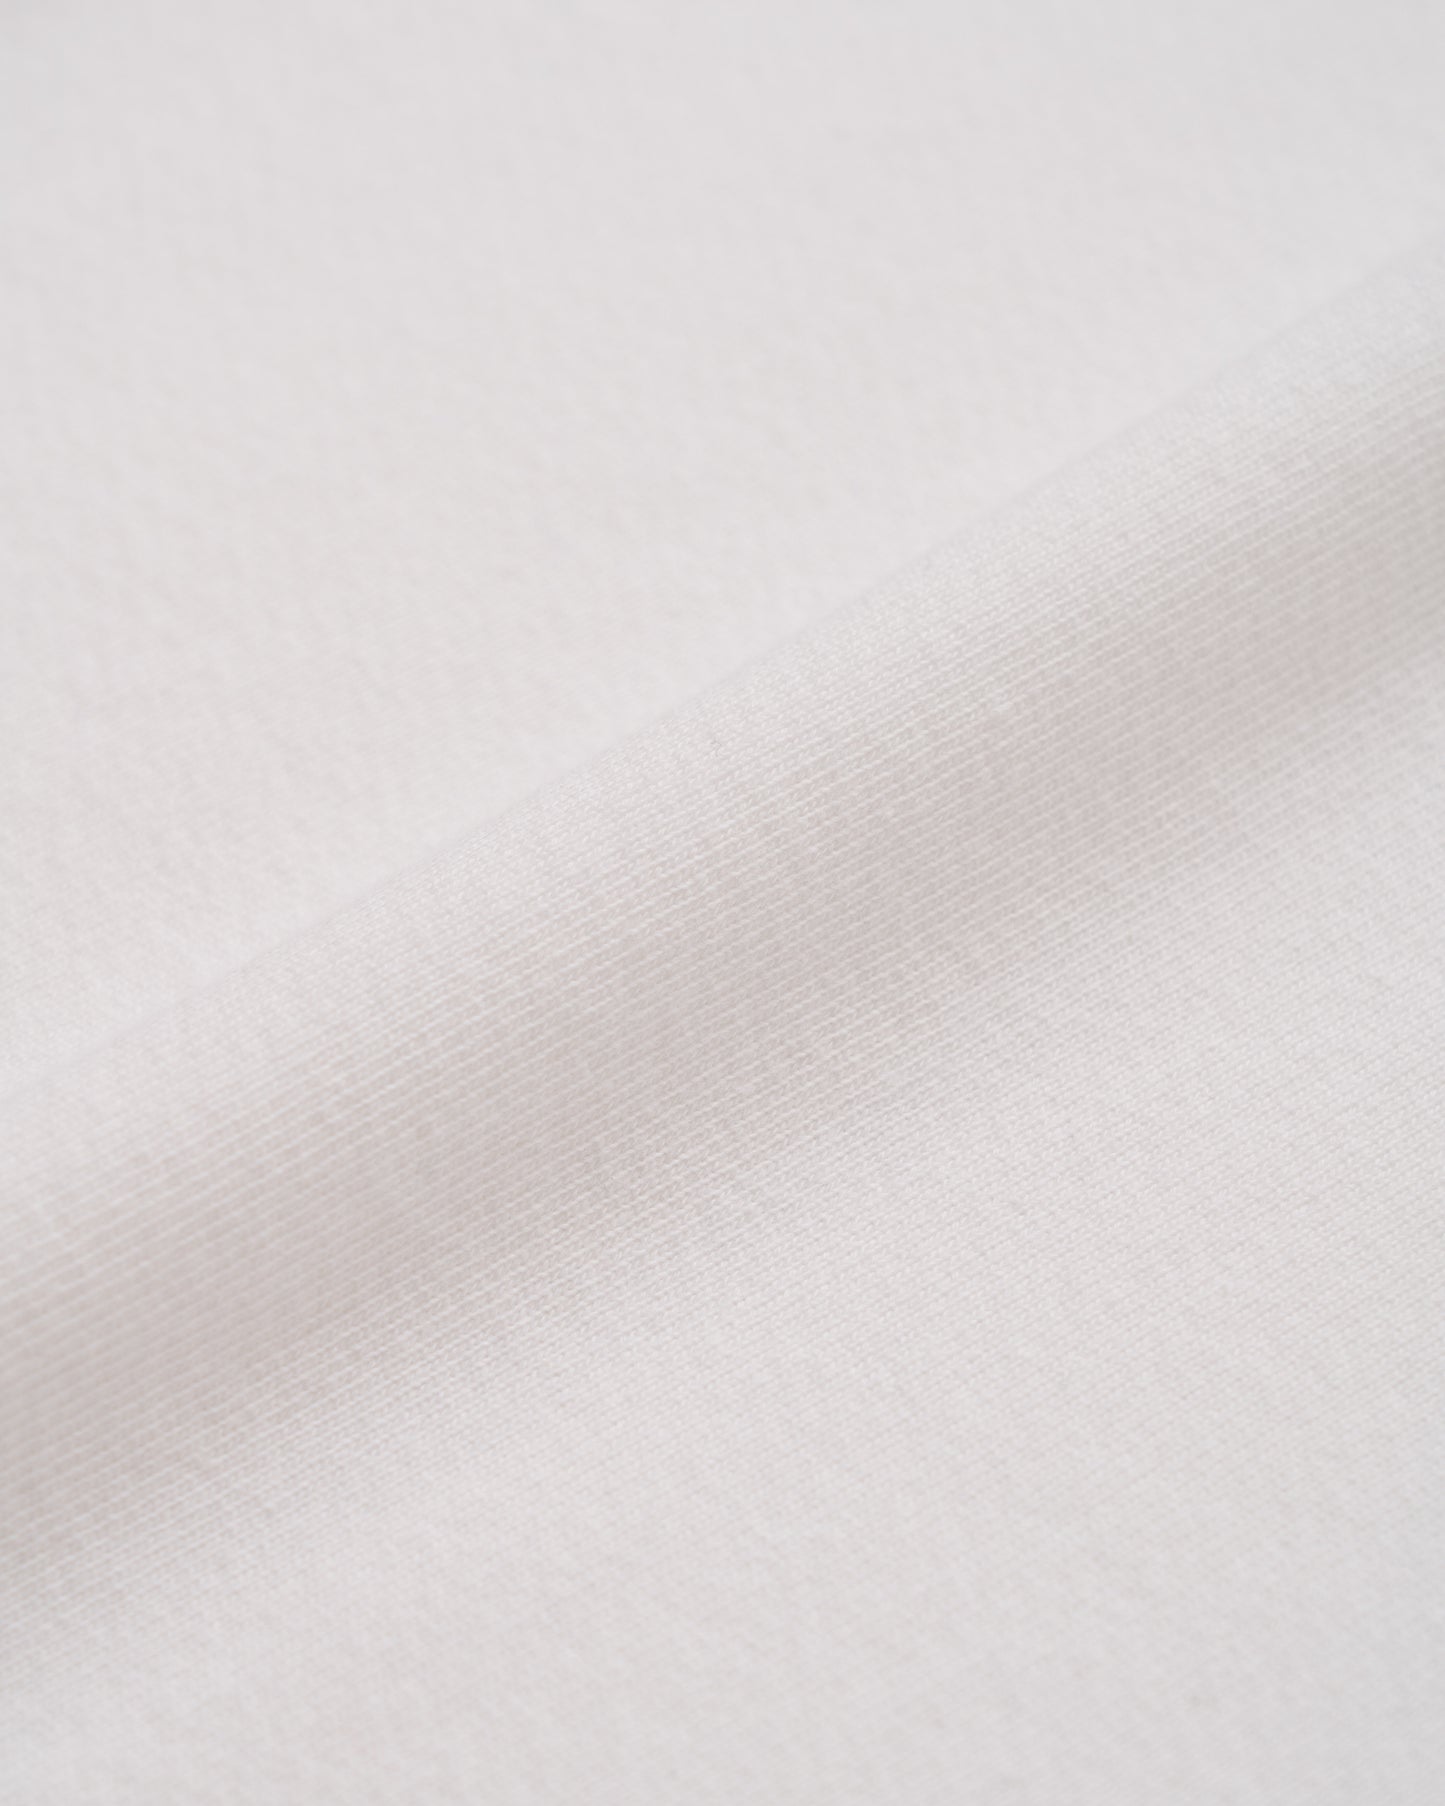 Terry Linen S/S - Lucent White